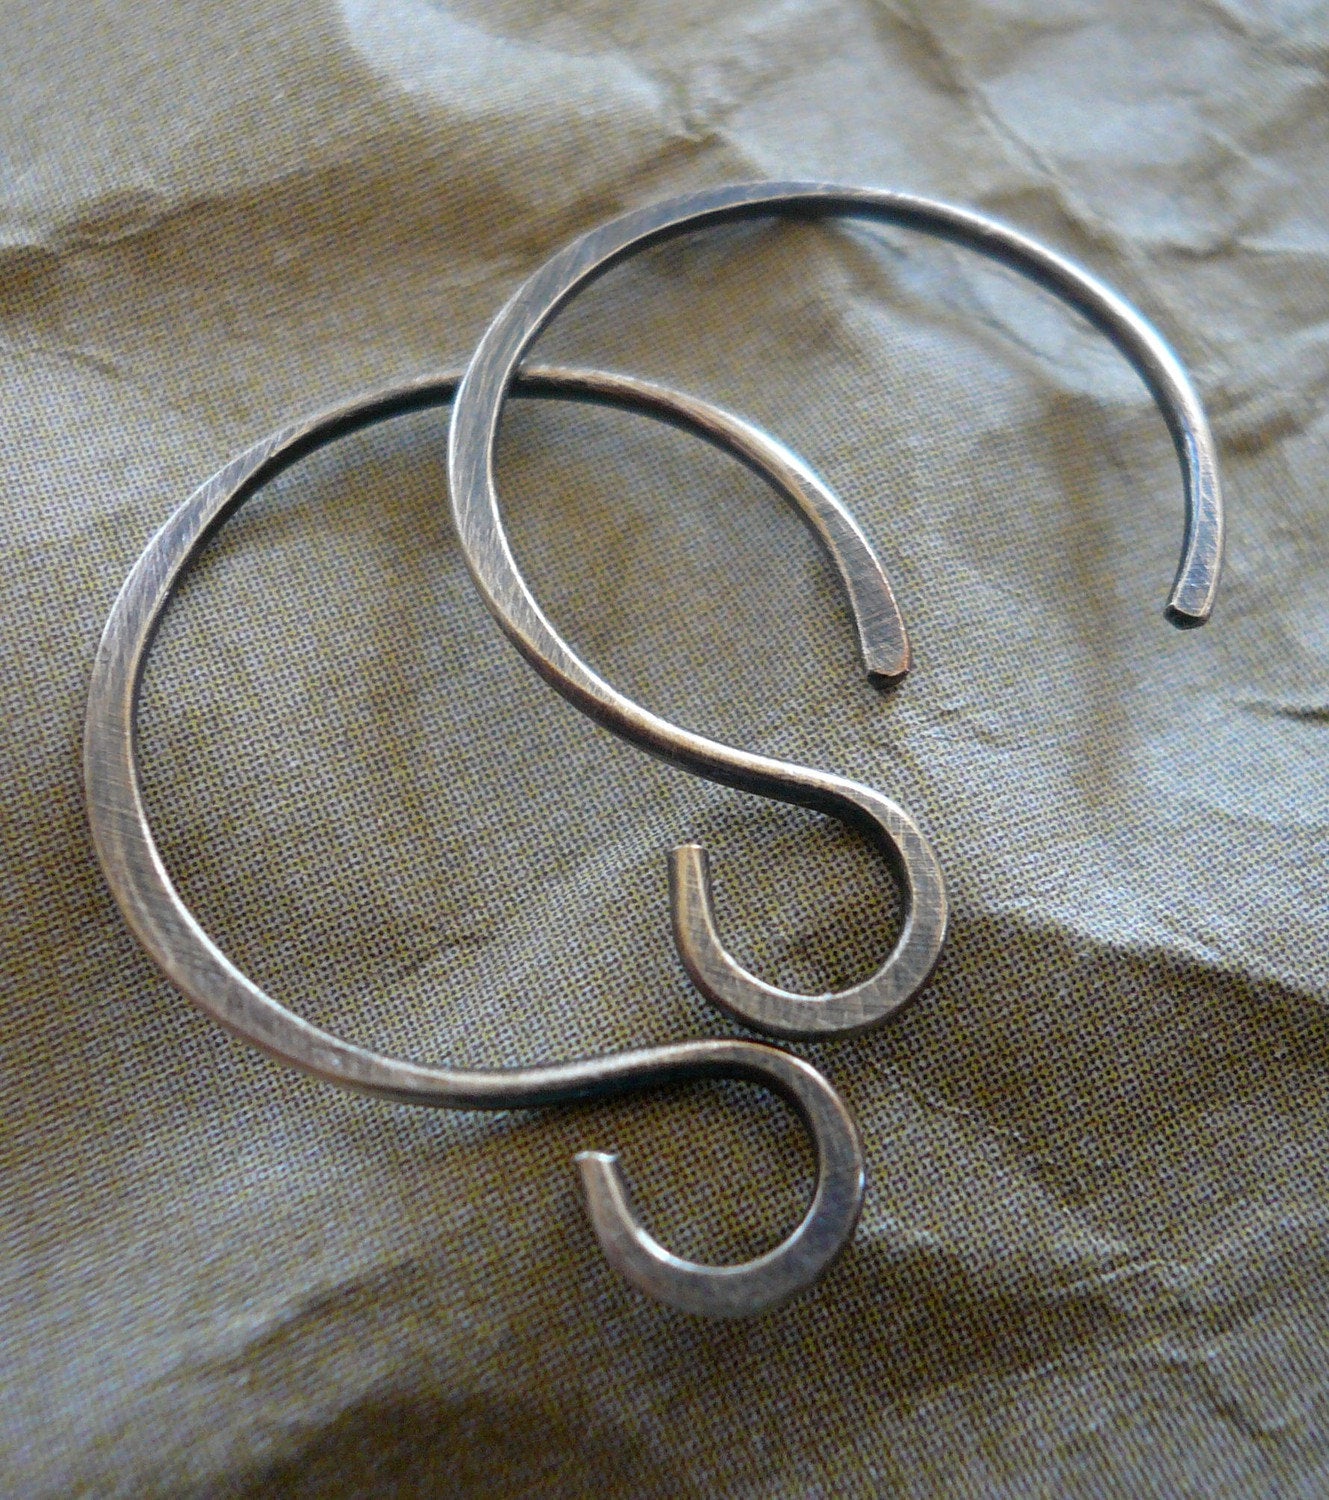 Large Solitude Sterling Silver Earwires - Handmade. Handforged. Oxidized and polished